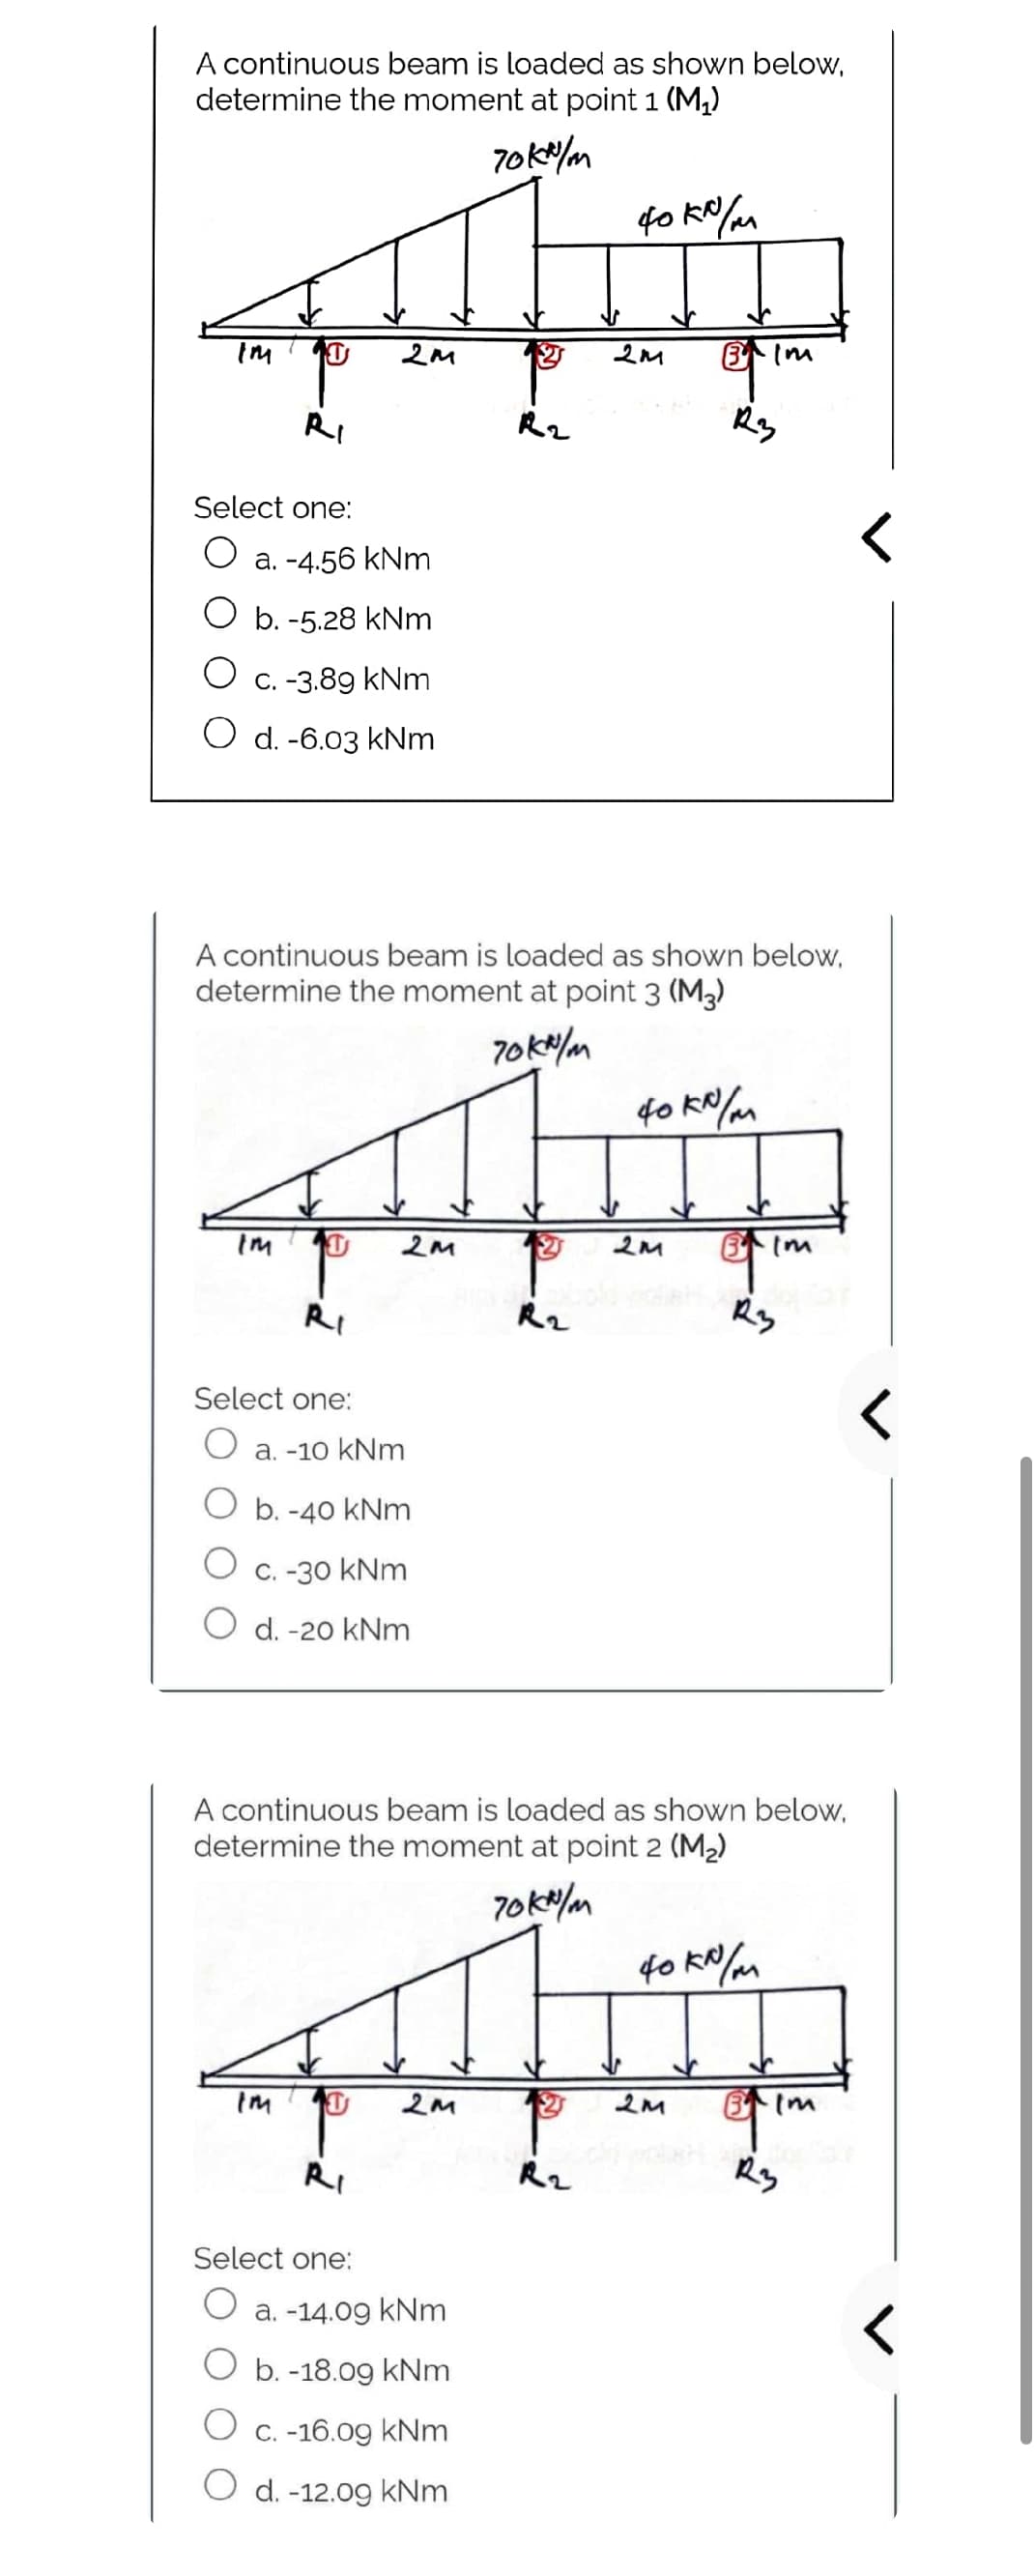 A continuous beam is loaded as shown below,
determine the moment at point 1 (M₁)
70kx/m
фоко/м
Select one:
O a. -4.56 kNm
O b.-5.28 kNm
O c. -3.89 kNm
O d. -6.03 kNm
2M
Im
Select one:
A continuous beam is loaded as shown below,
determine the moment at point 3 (M3)
70 kN/m
2M
R2
a. -10 kNm
b. -40 kNm
C. -30 kNm
O d. -20 kNm
40 kN/m
Top
2M
R2
2м
Select one:
a. -14.09 kNm
O b.-18.09 kNm
O c. -16.09 kNm
O d. -12.09 kNm
یک لیکم کے
70kn/m
Im
R3
A continuous beam is loaded as shown below,
determine the moment at point 2 (M₂)
R2
$2 2M
40 kN/m
Im
R3
Bim
<
R3